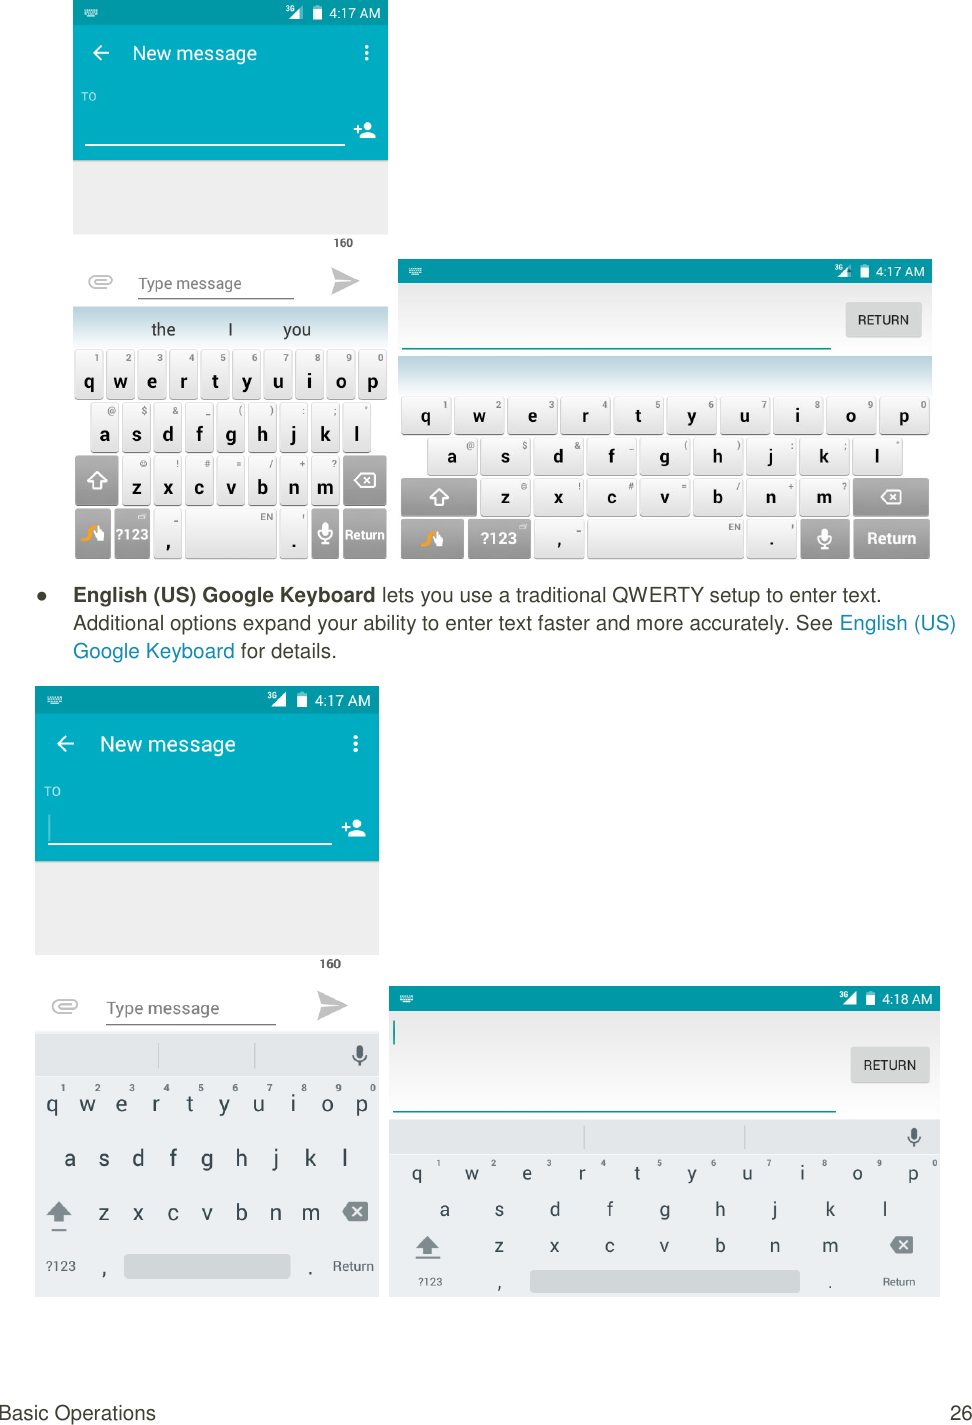 Basic Operations  26     ● English (US) Google Keyboard lets you use a traditional QWERTY setup to enter text. Additional options expand your ability to enter text faster and more accurately. See English (US) Google Keyboard for details.     